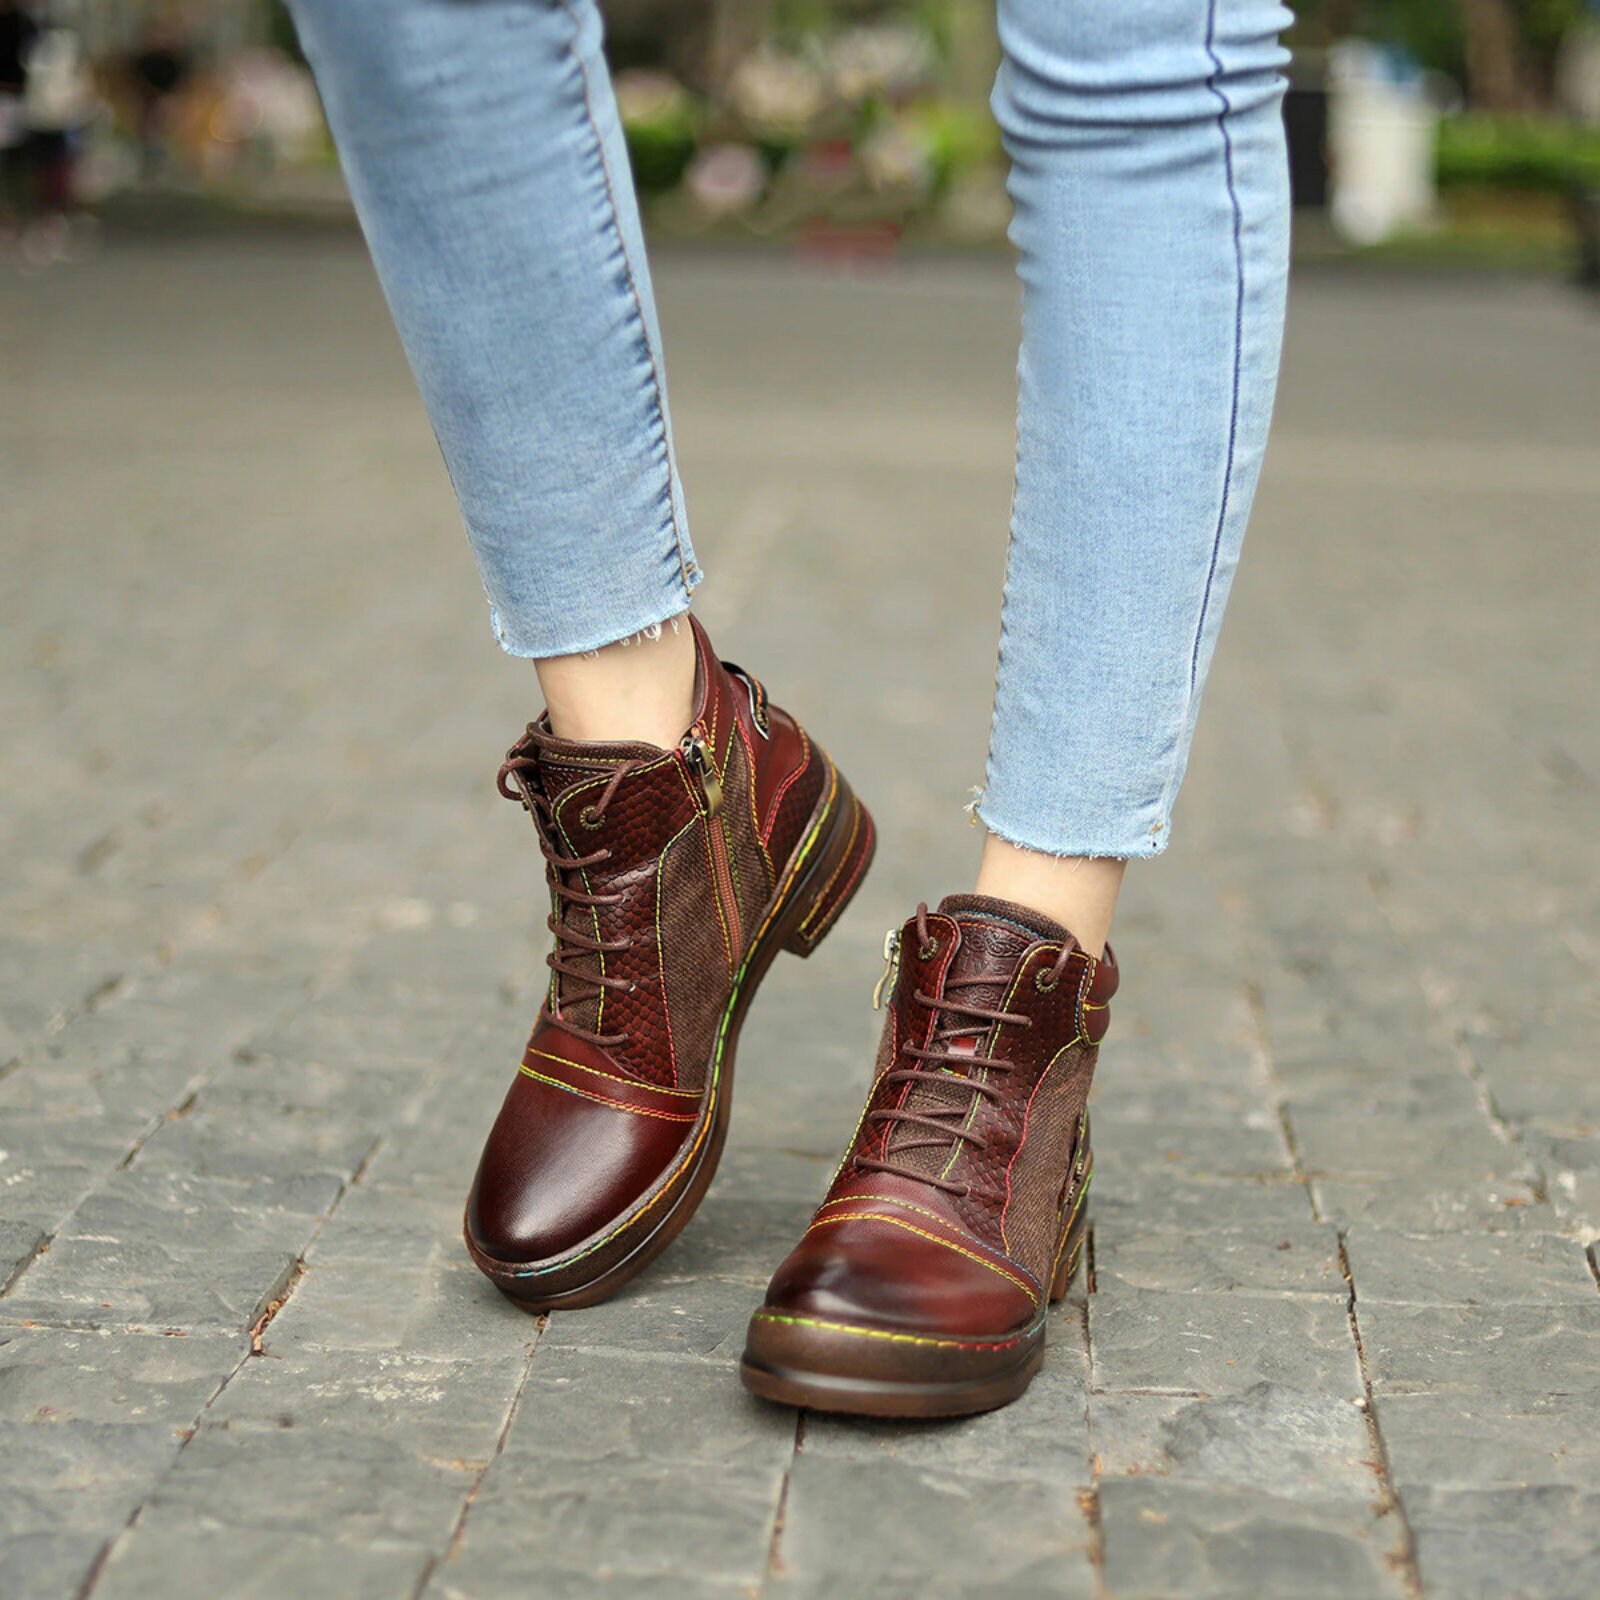 Brown Sneakers, Boots, and Platforms.